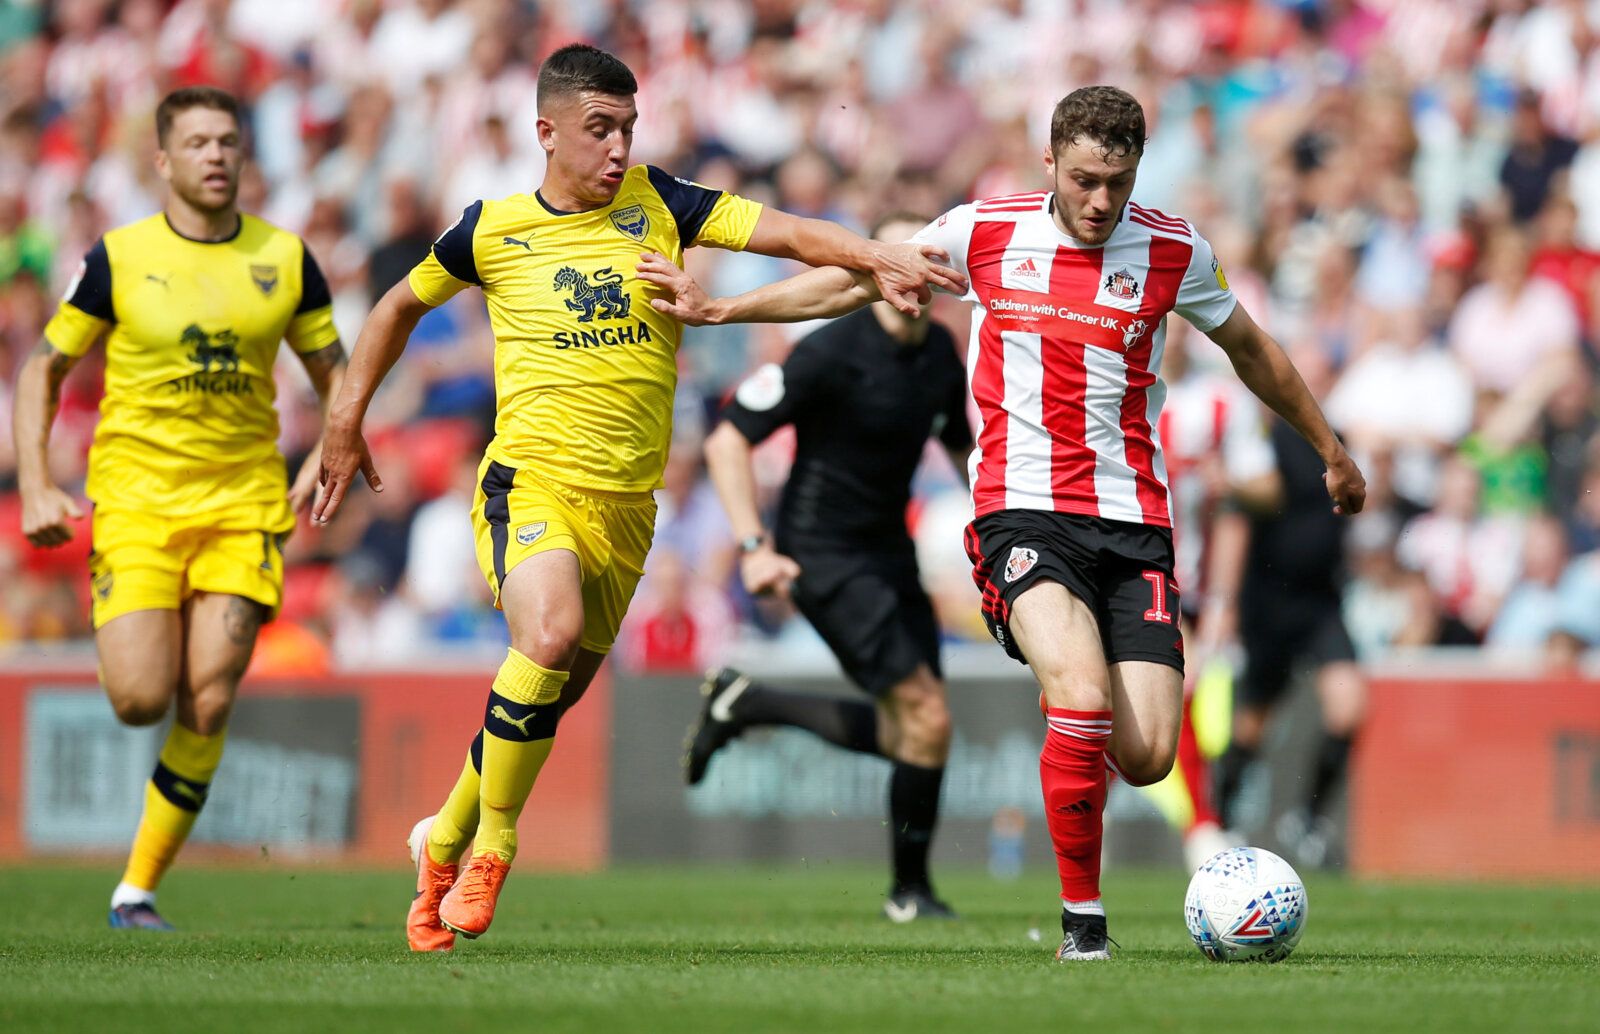 Soccer Football - League One - Sunderland v Oxford United - Stadium of Light, Sunderland, Britain - August 3, 2019  Oxford United's Cameron Brannagan in action with Sunderland's Elliot Embleton  Action Images/Ed Sykes  EDITORIAL USE ONLY. No use with unauthorized audio, video, data, fixture lists, club/league logos or 